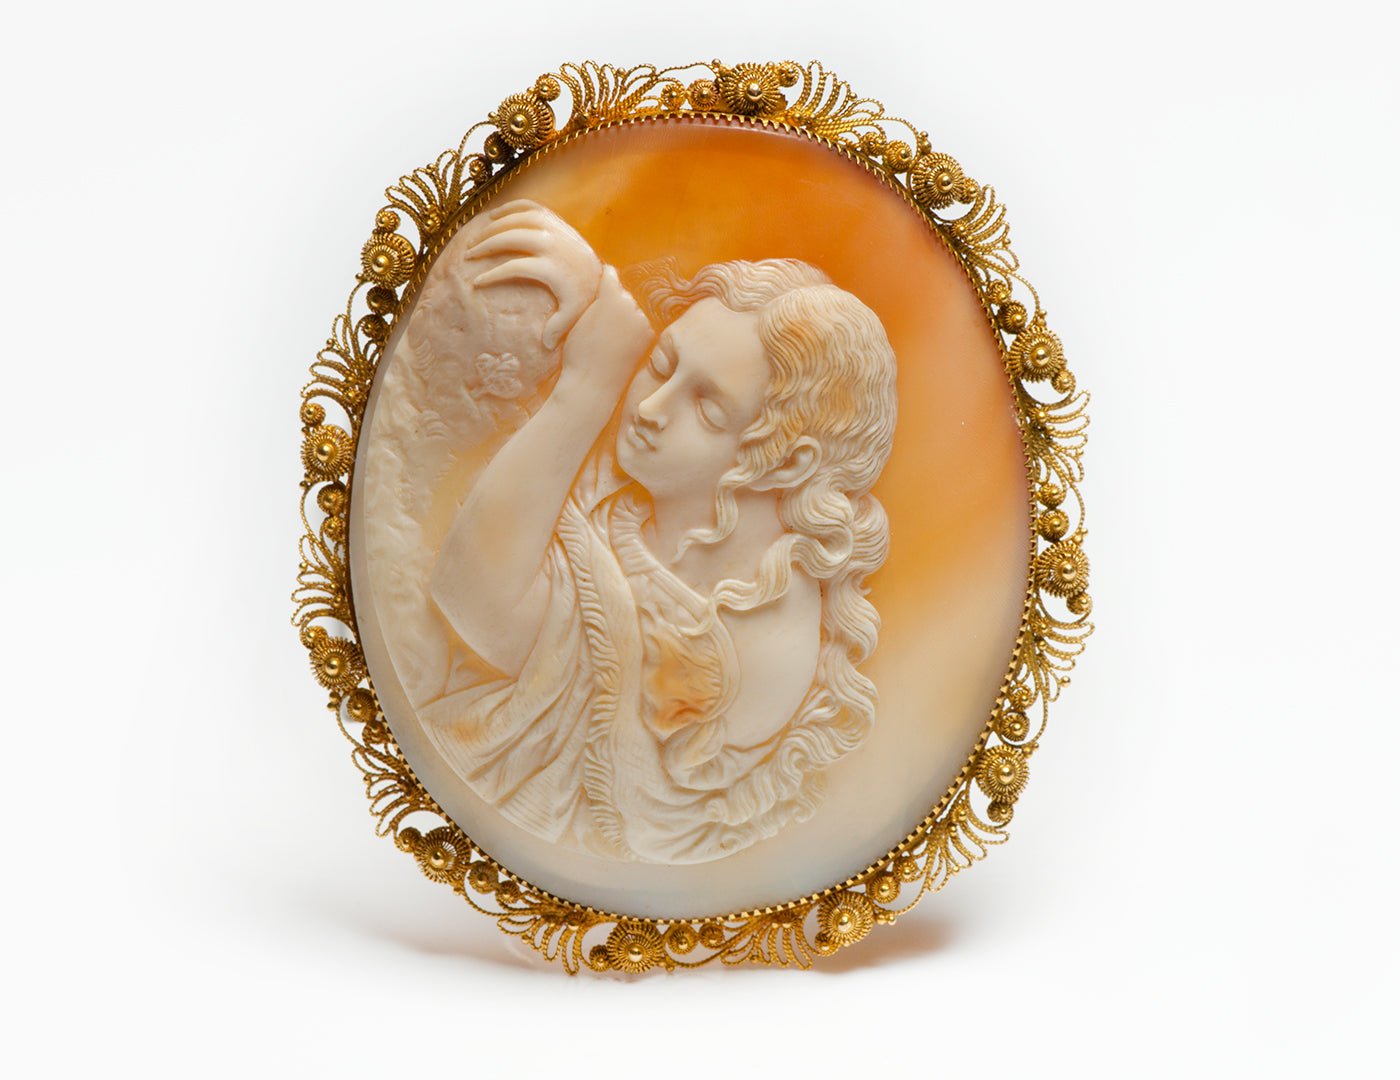 Antique Large Shell Filigree Gold Cameo Lady Brooch